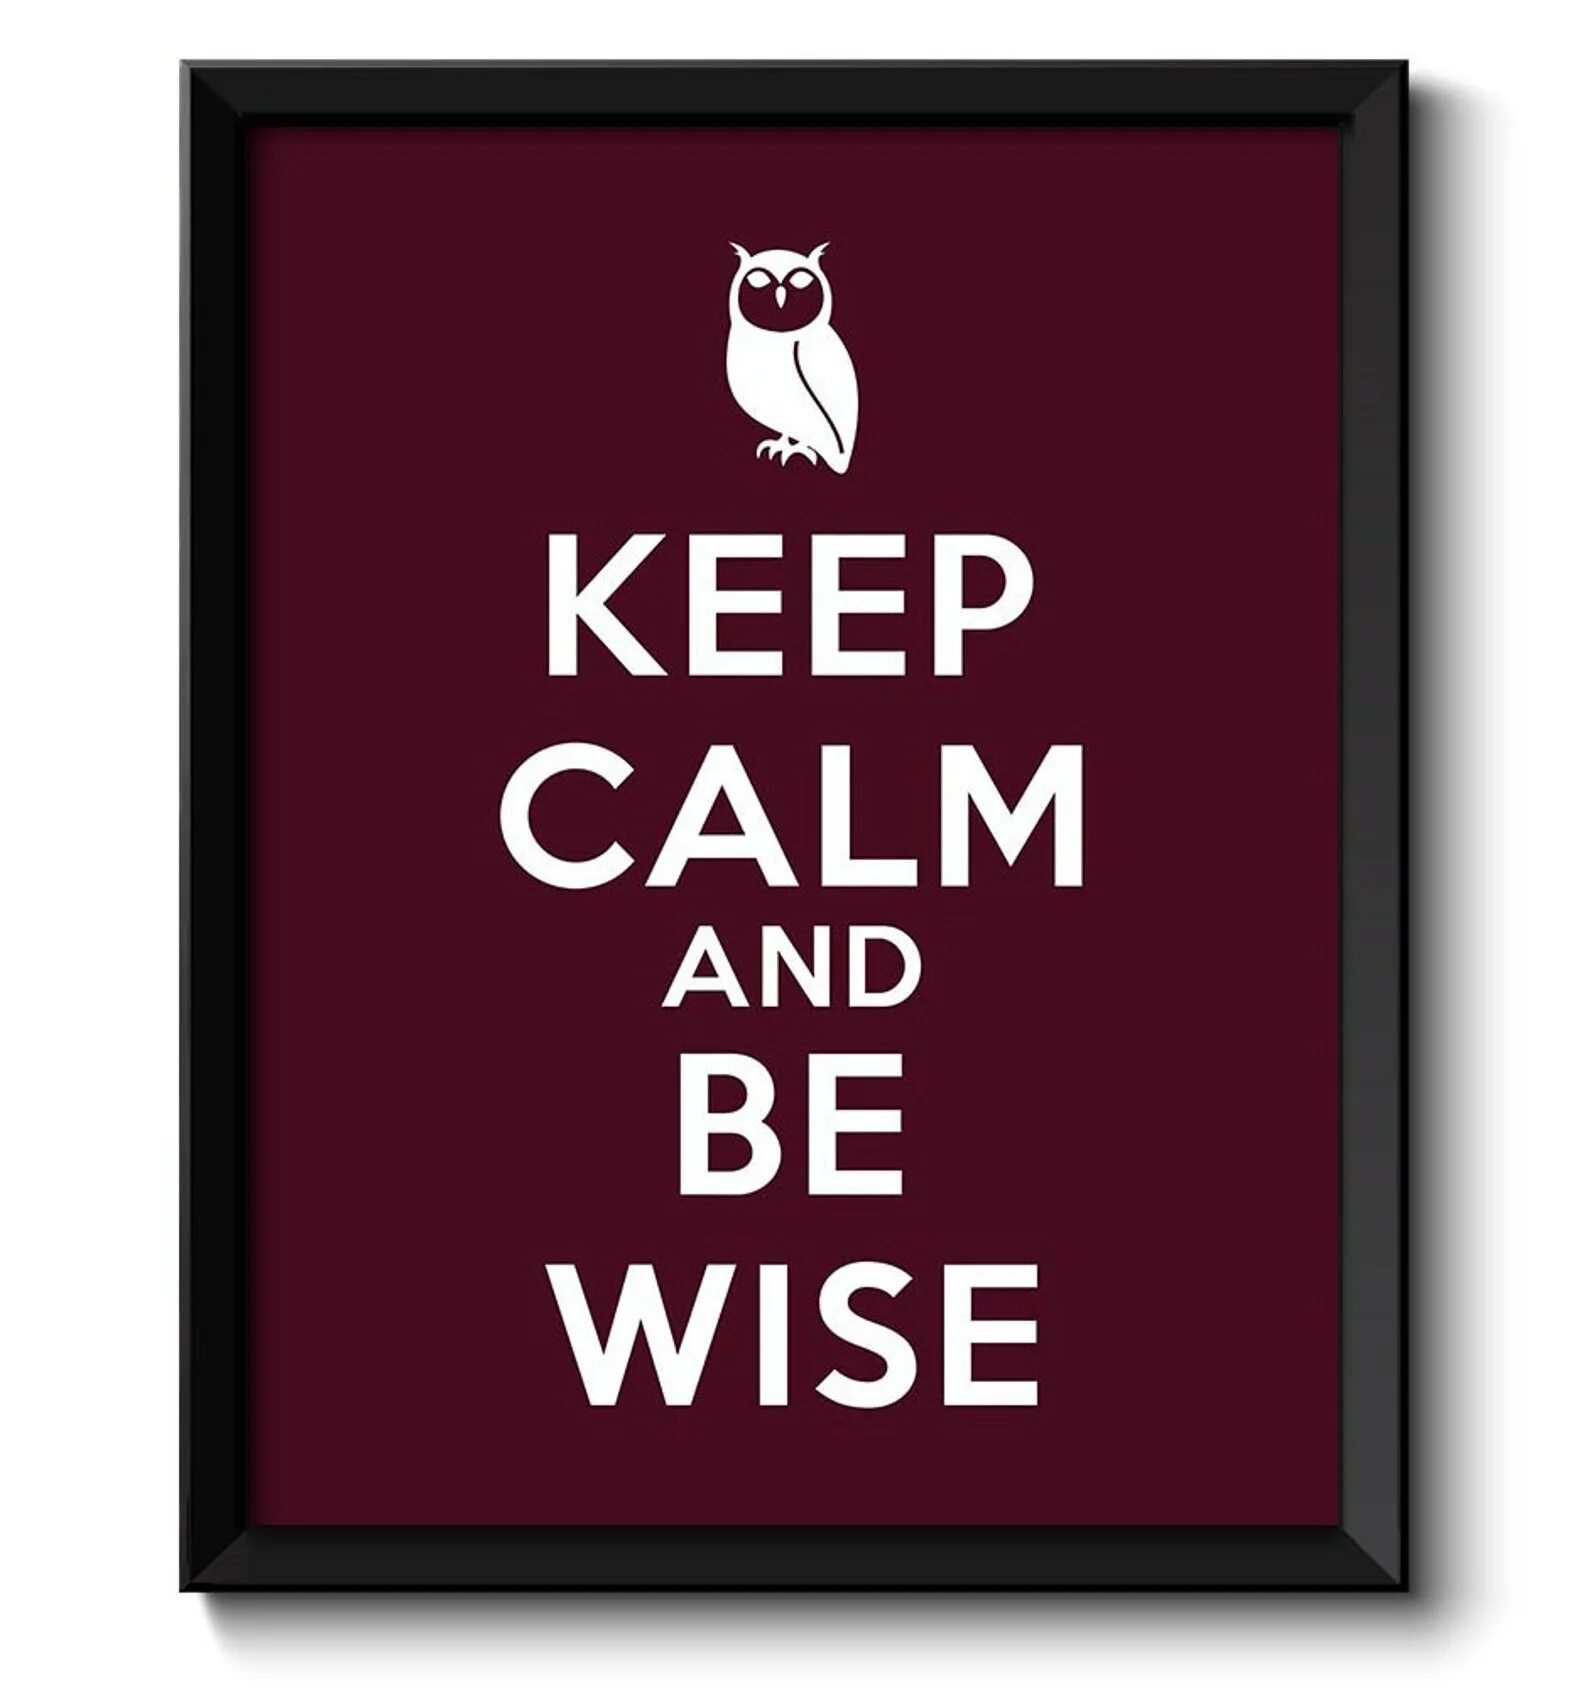 A wise drivers life. Be Wise. Stay Calm. Wise привод. Постер keep Calm and stay Zen.